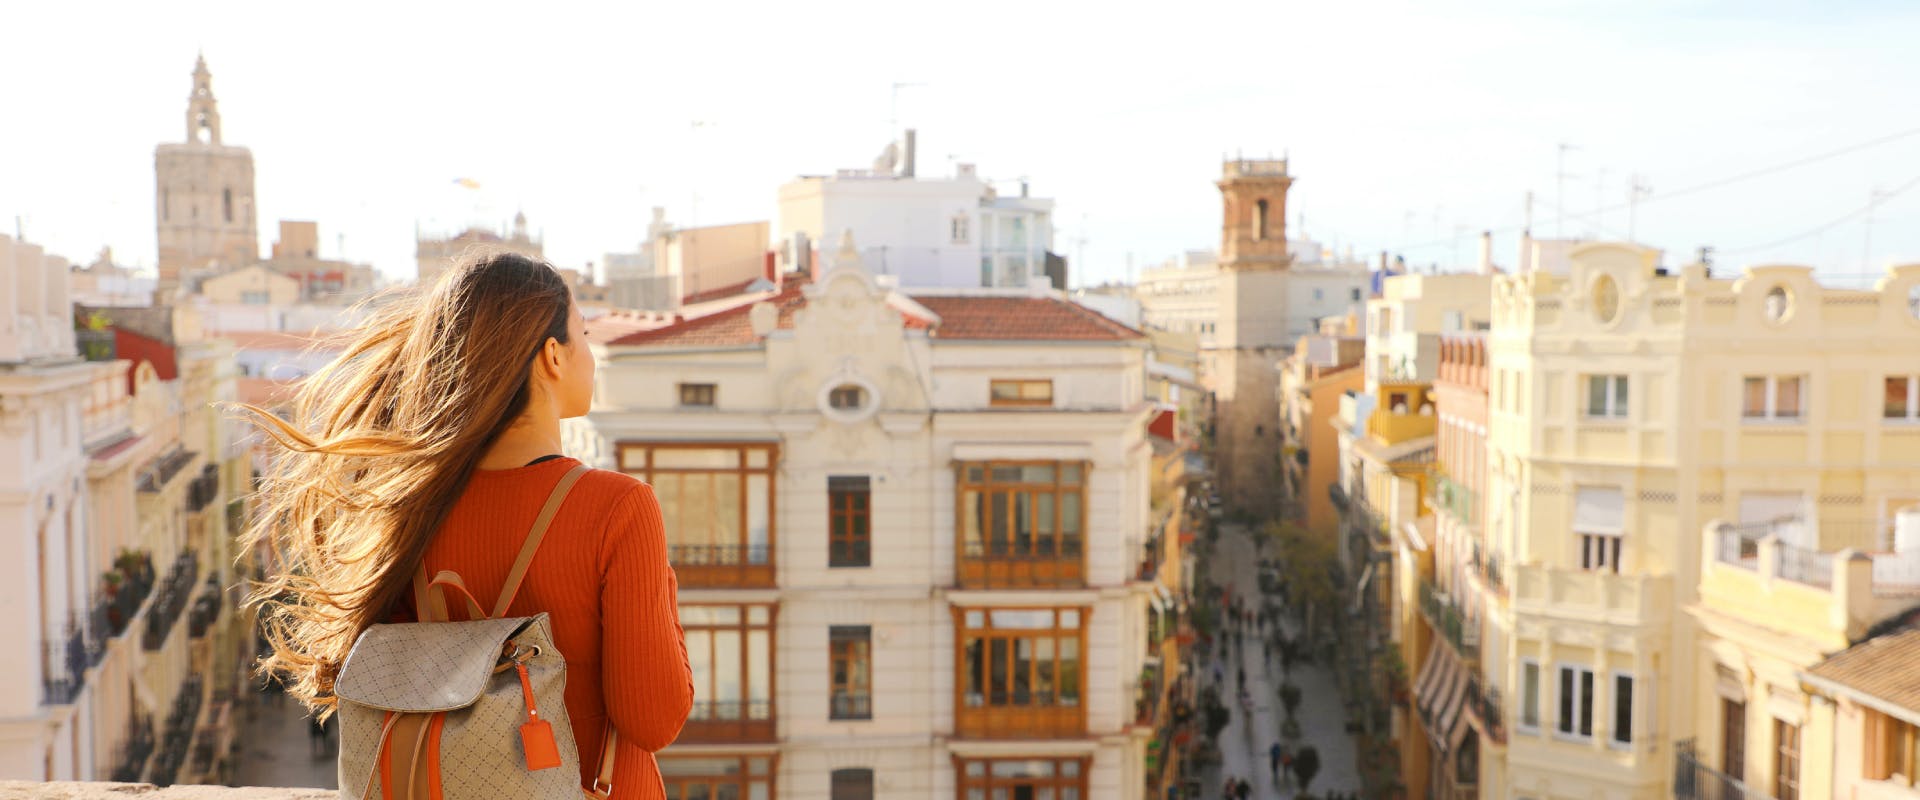 A solo female traveler looks out over rooftops in Spain.